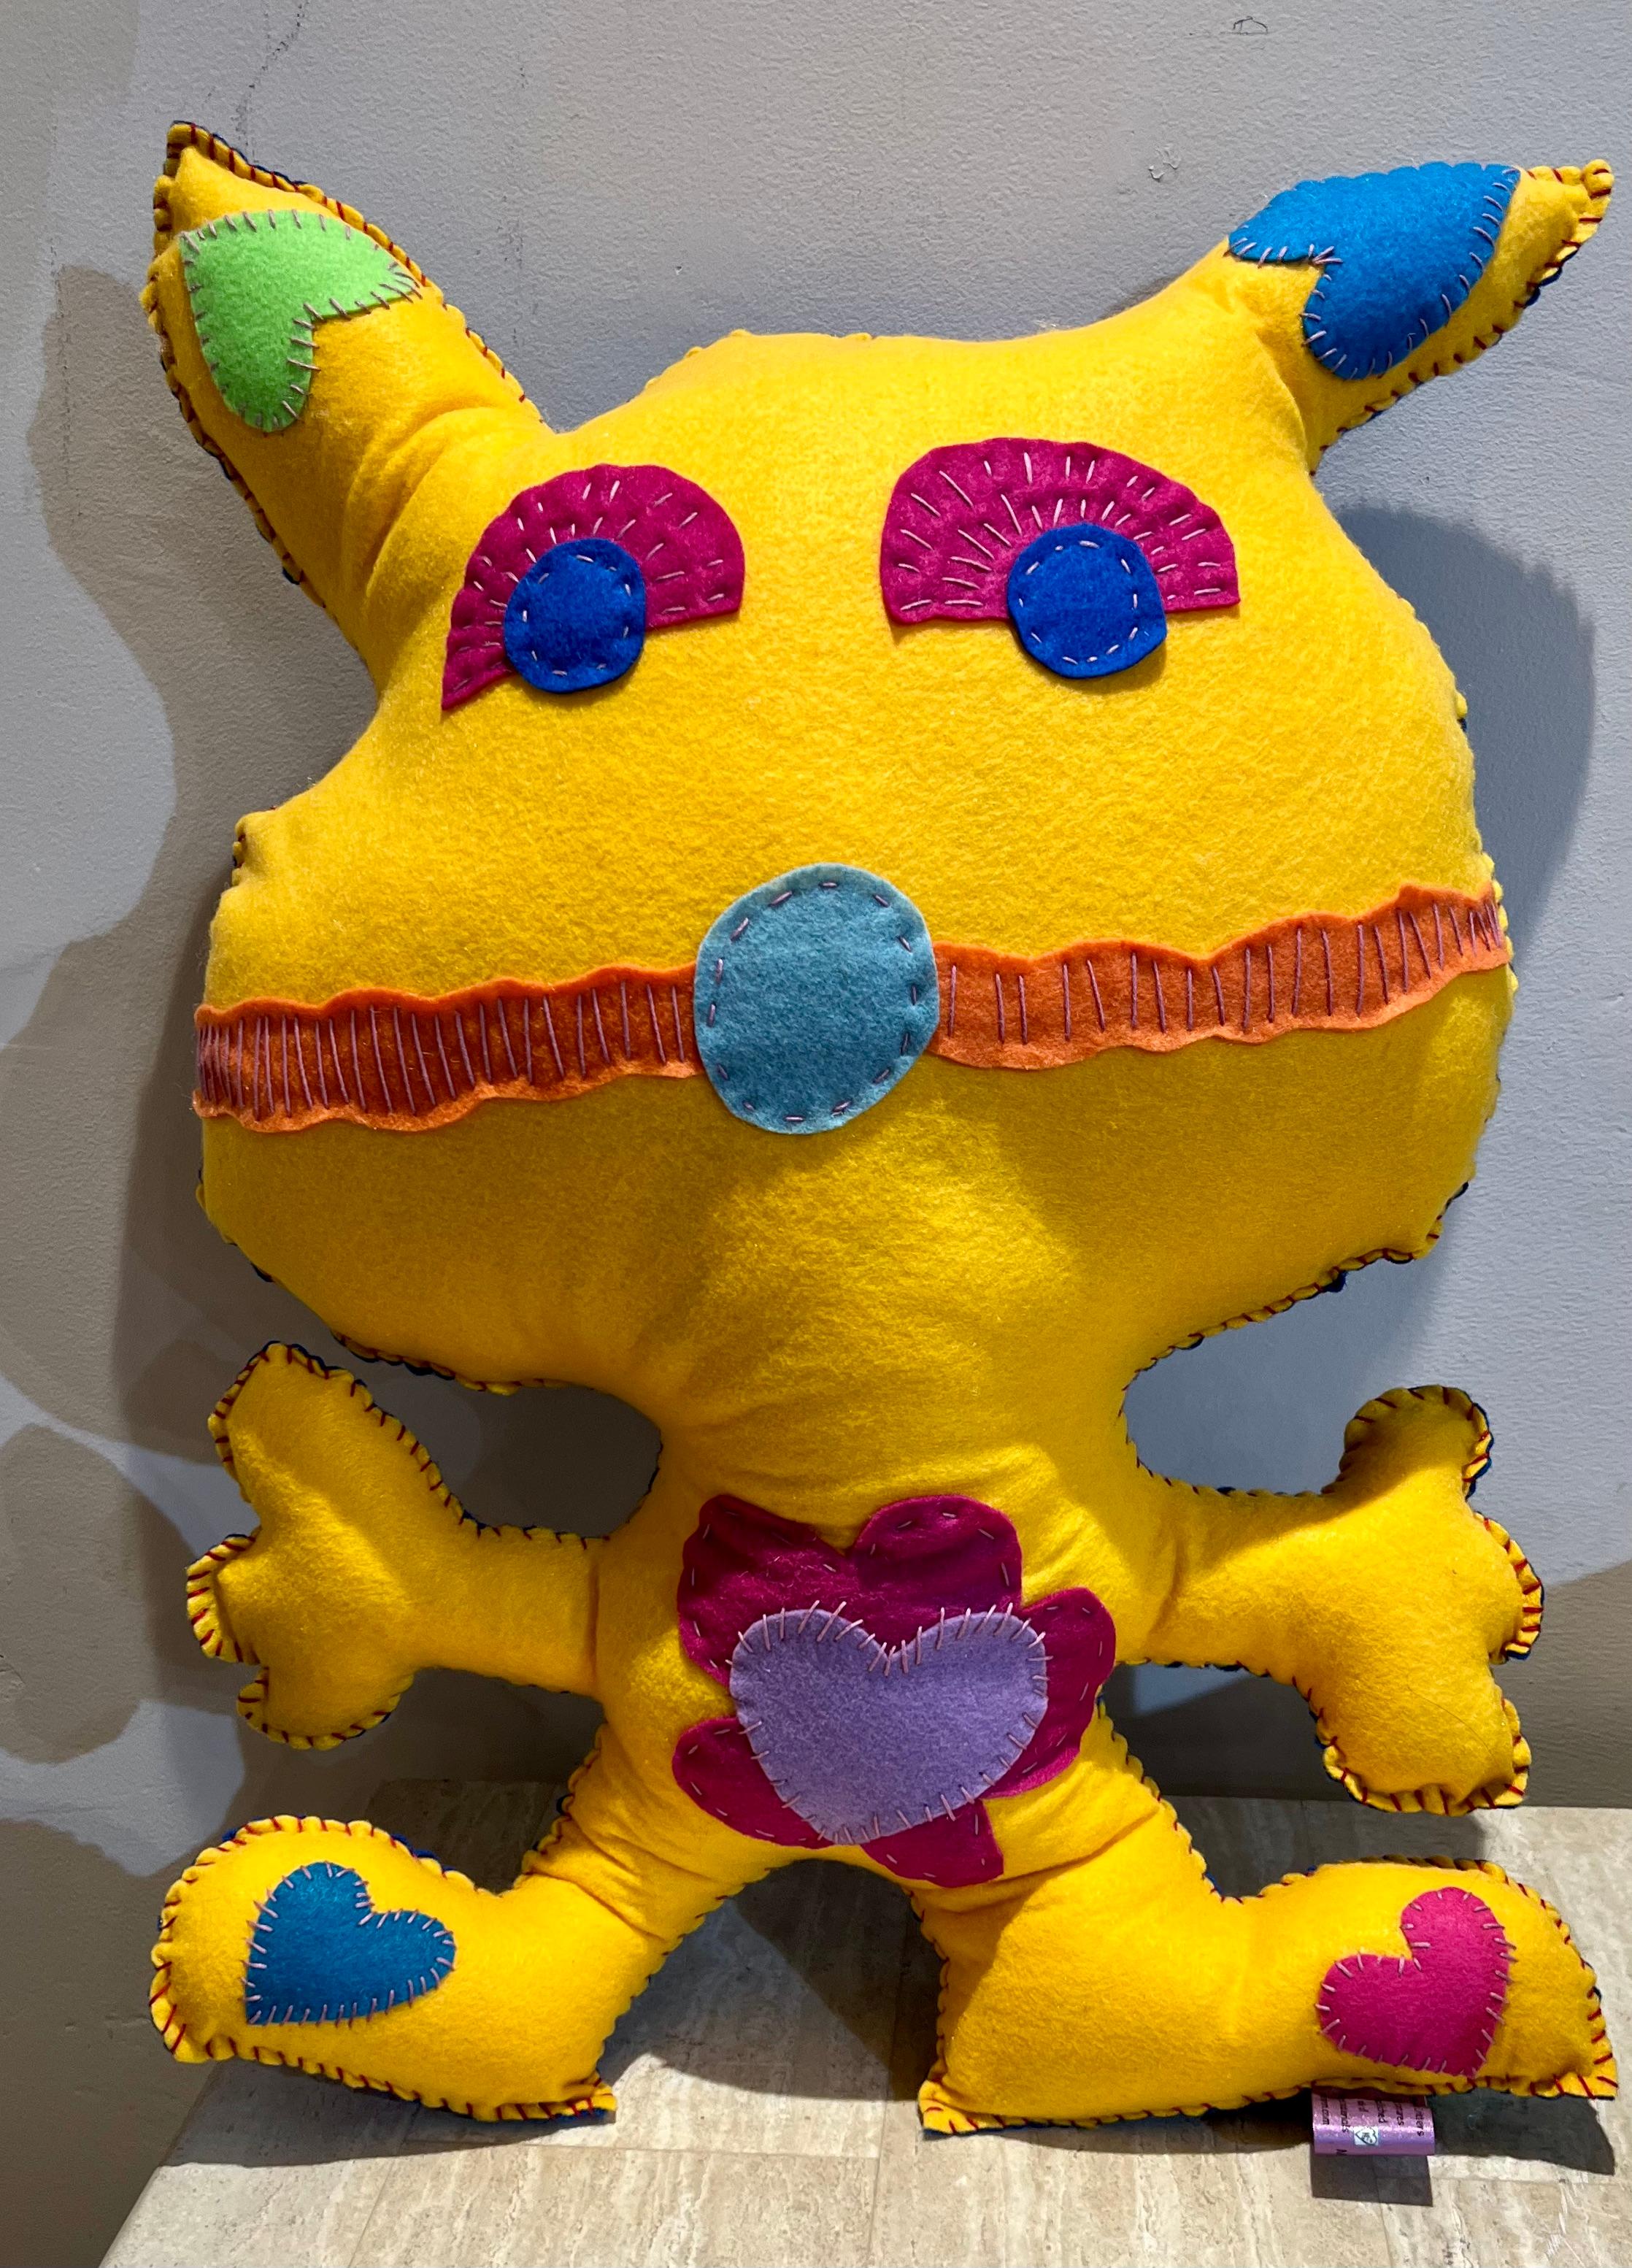 Free Range Critter, soft sculpture, Kerry Green, Santa Fe, yellow, blue, hearts

Since childhood, Kerry Green has always been creative; painting, drawing, sculpting, and sewing. Her family provided her with materials and encouraged her efforts. She